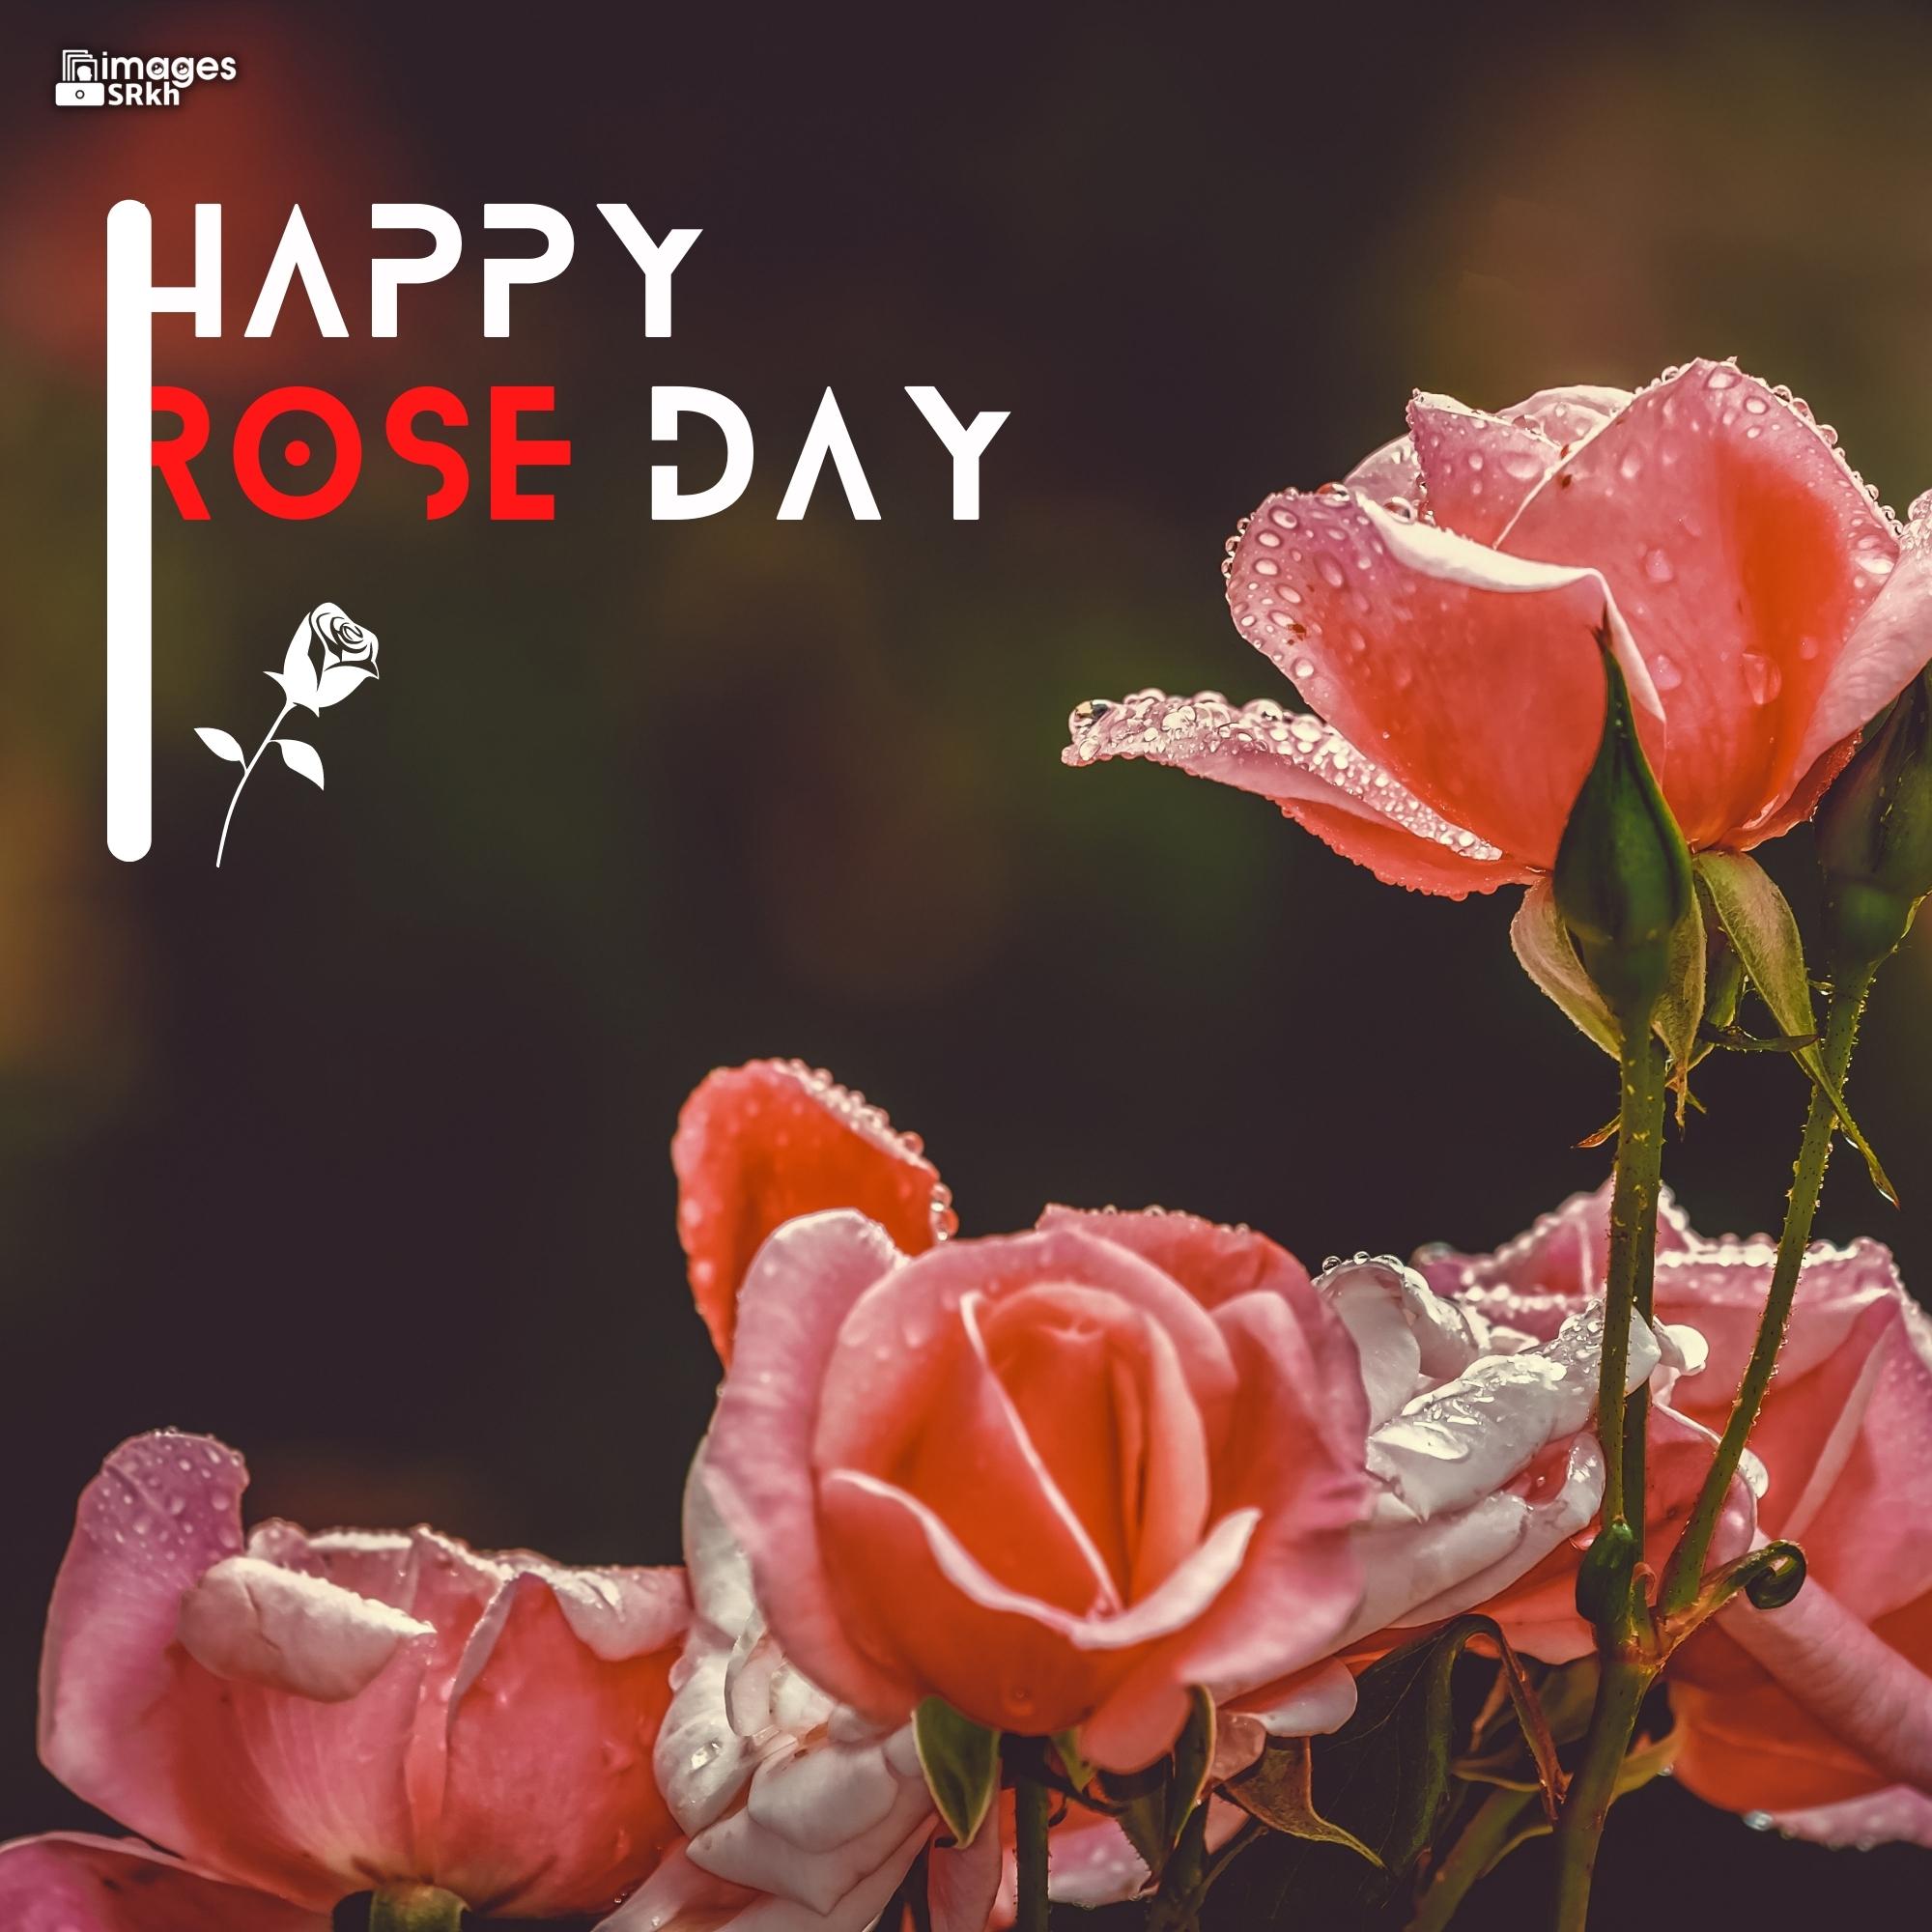 Happy Rose Day Image Hd Download (83)